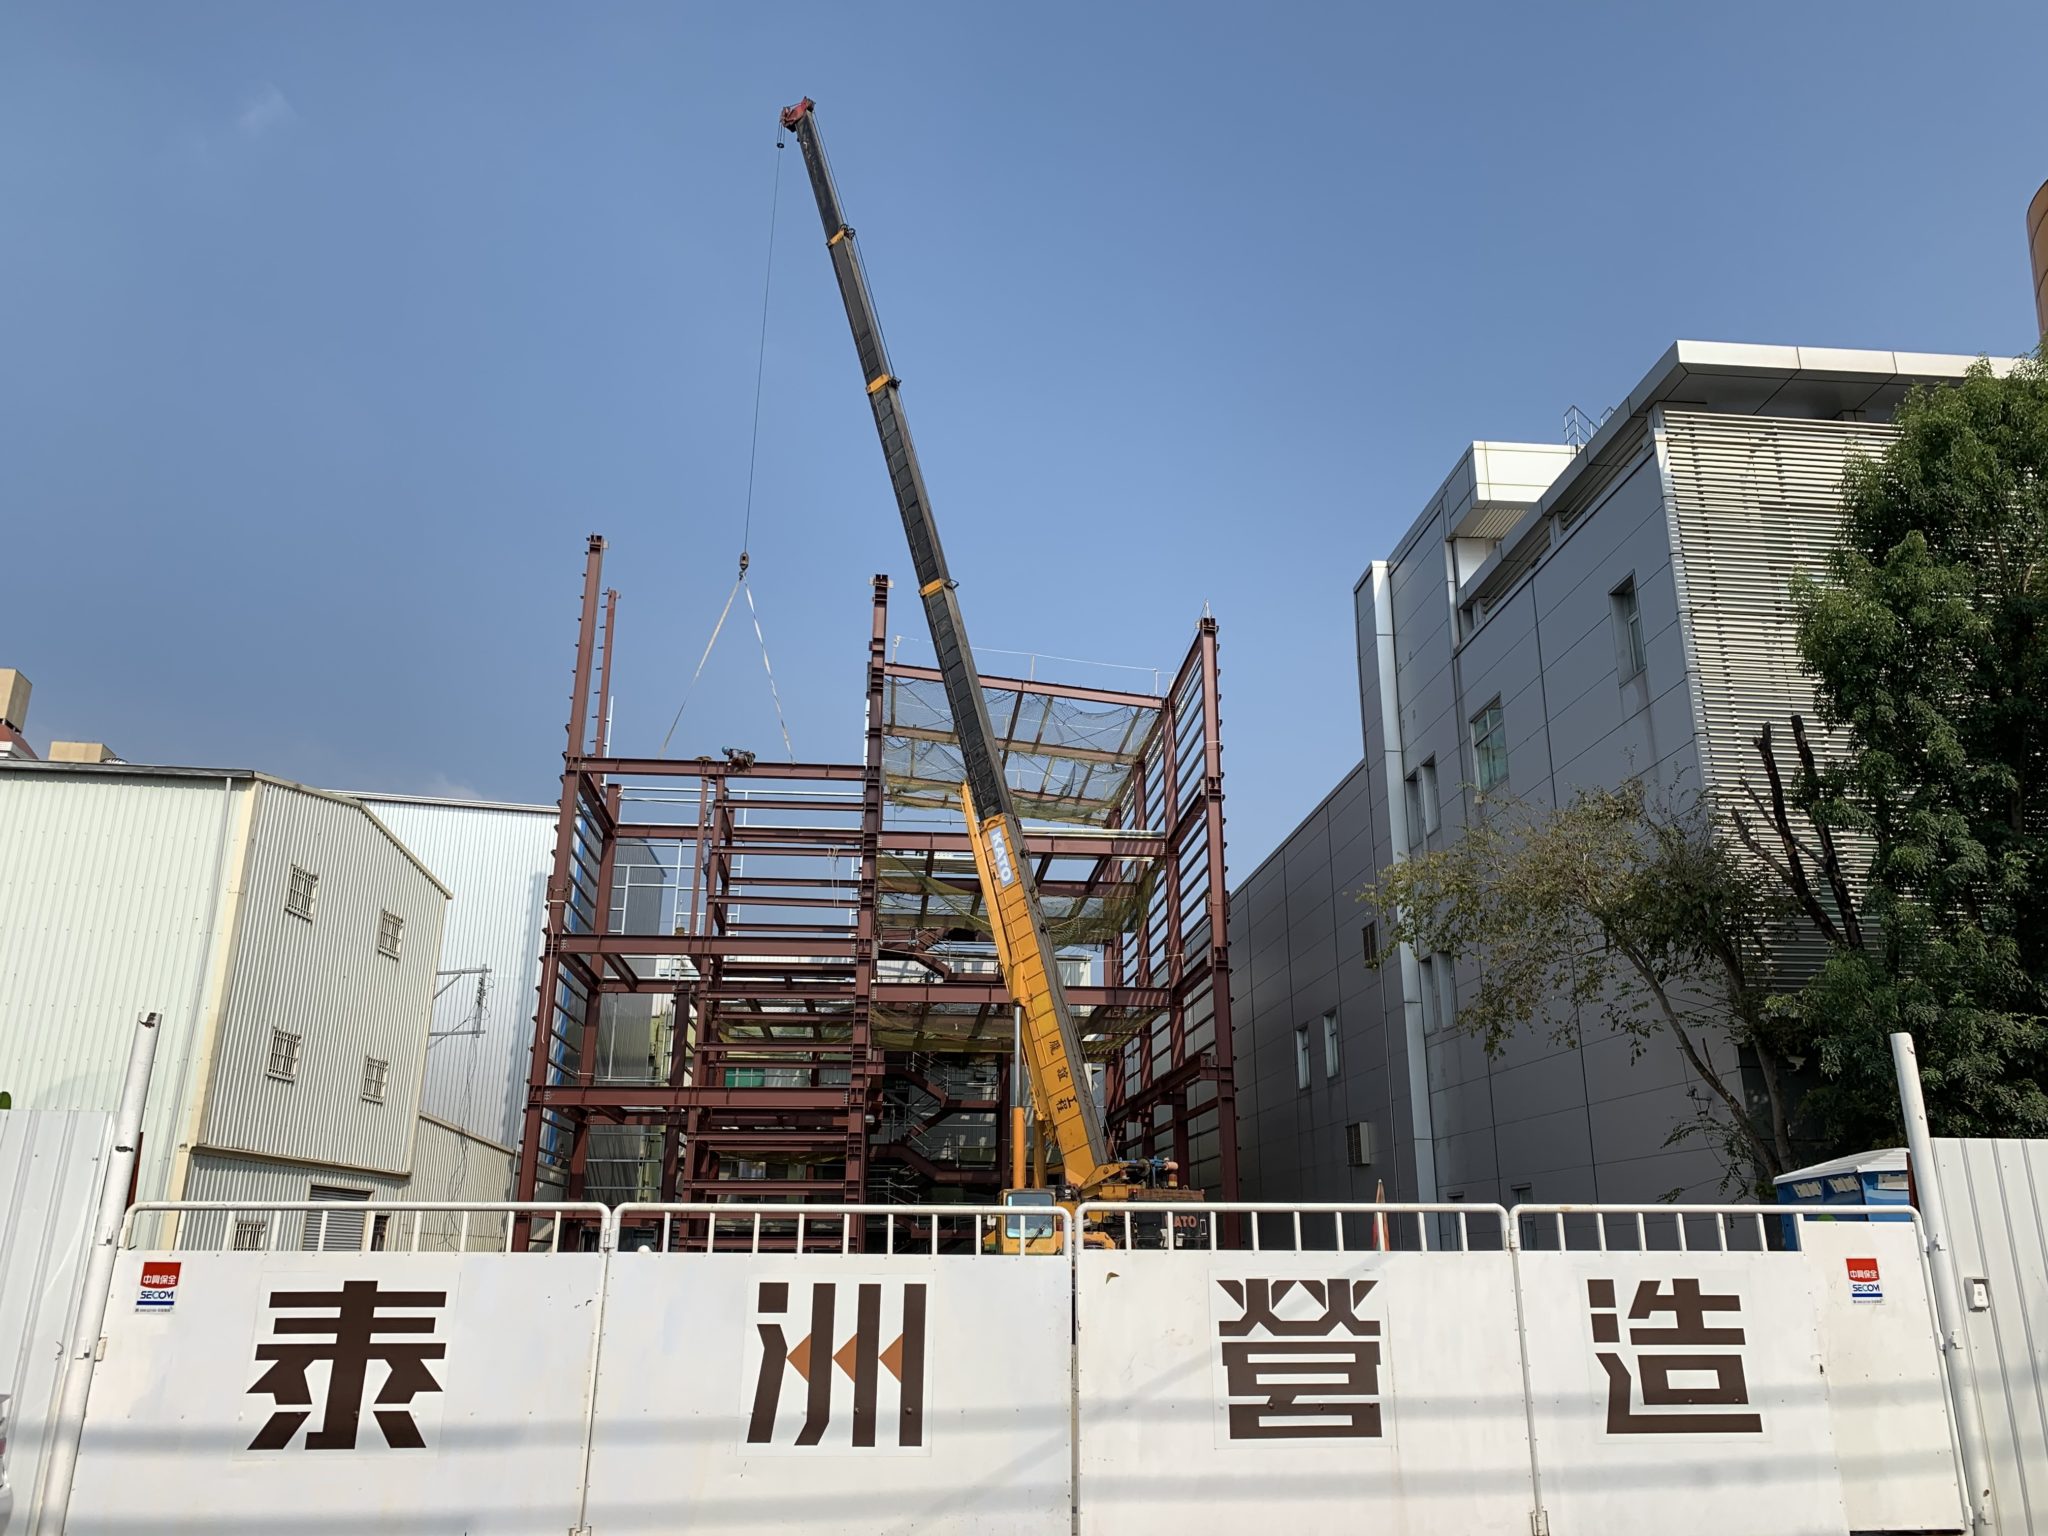 2019/7 – Starting the construction of Wan-Jin Plant